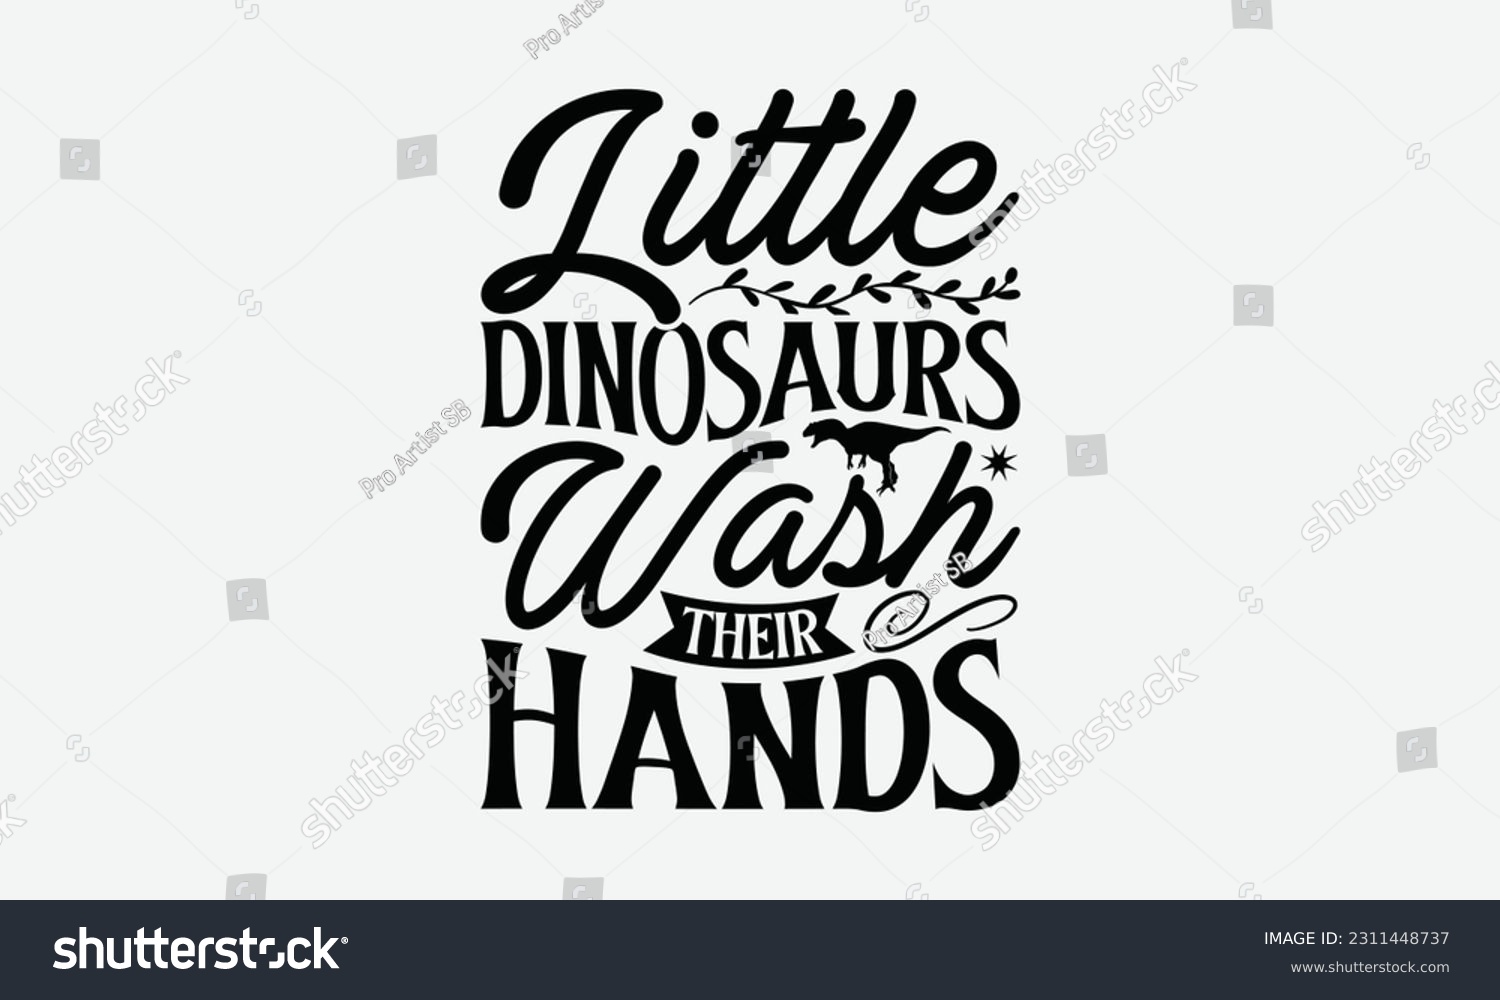 SVG of Little Dinosaurs Wash Their Hands - Dinosaur SVG Design, Handmade Calligraphy Vector Illustration, And Greeting Card Template With Typography Text. svg